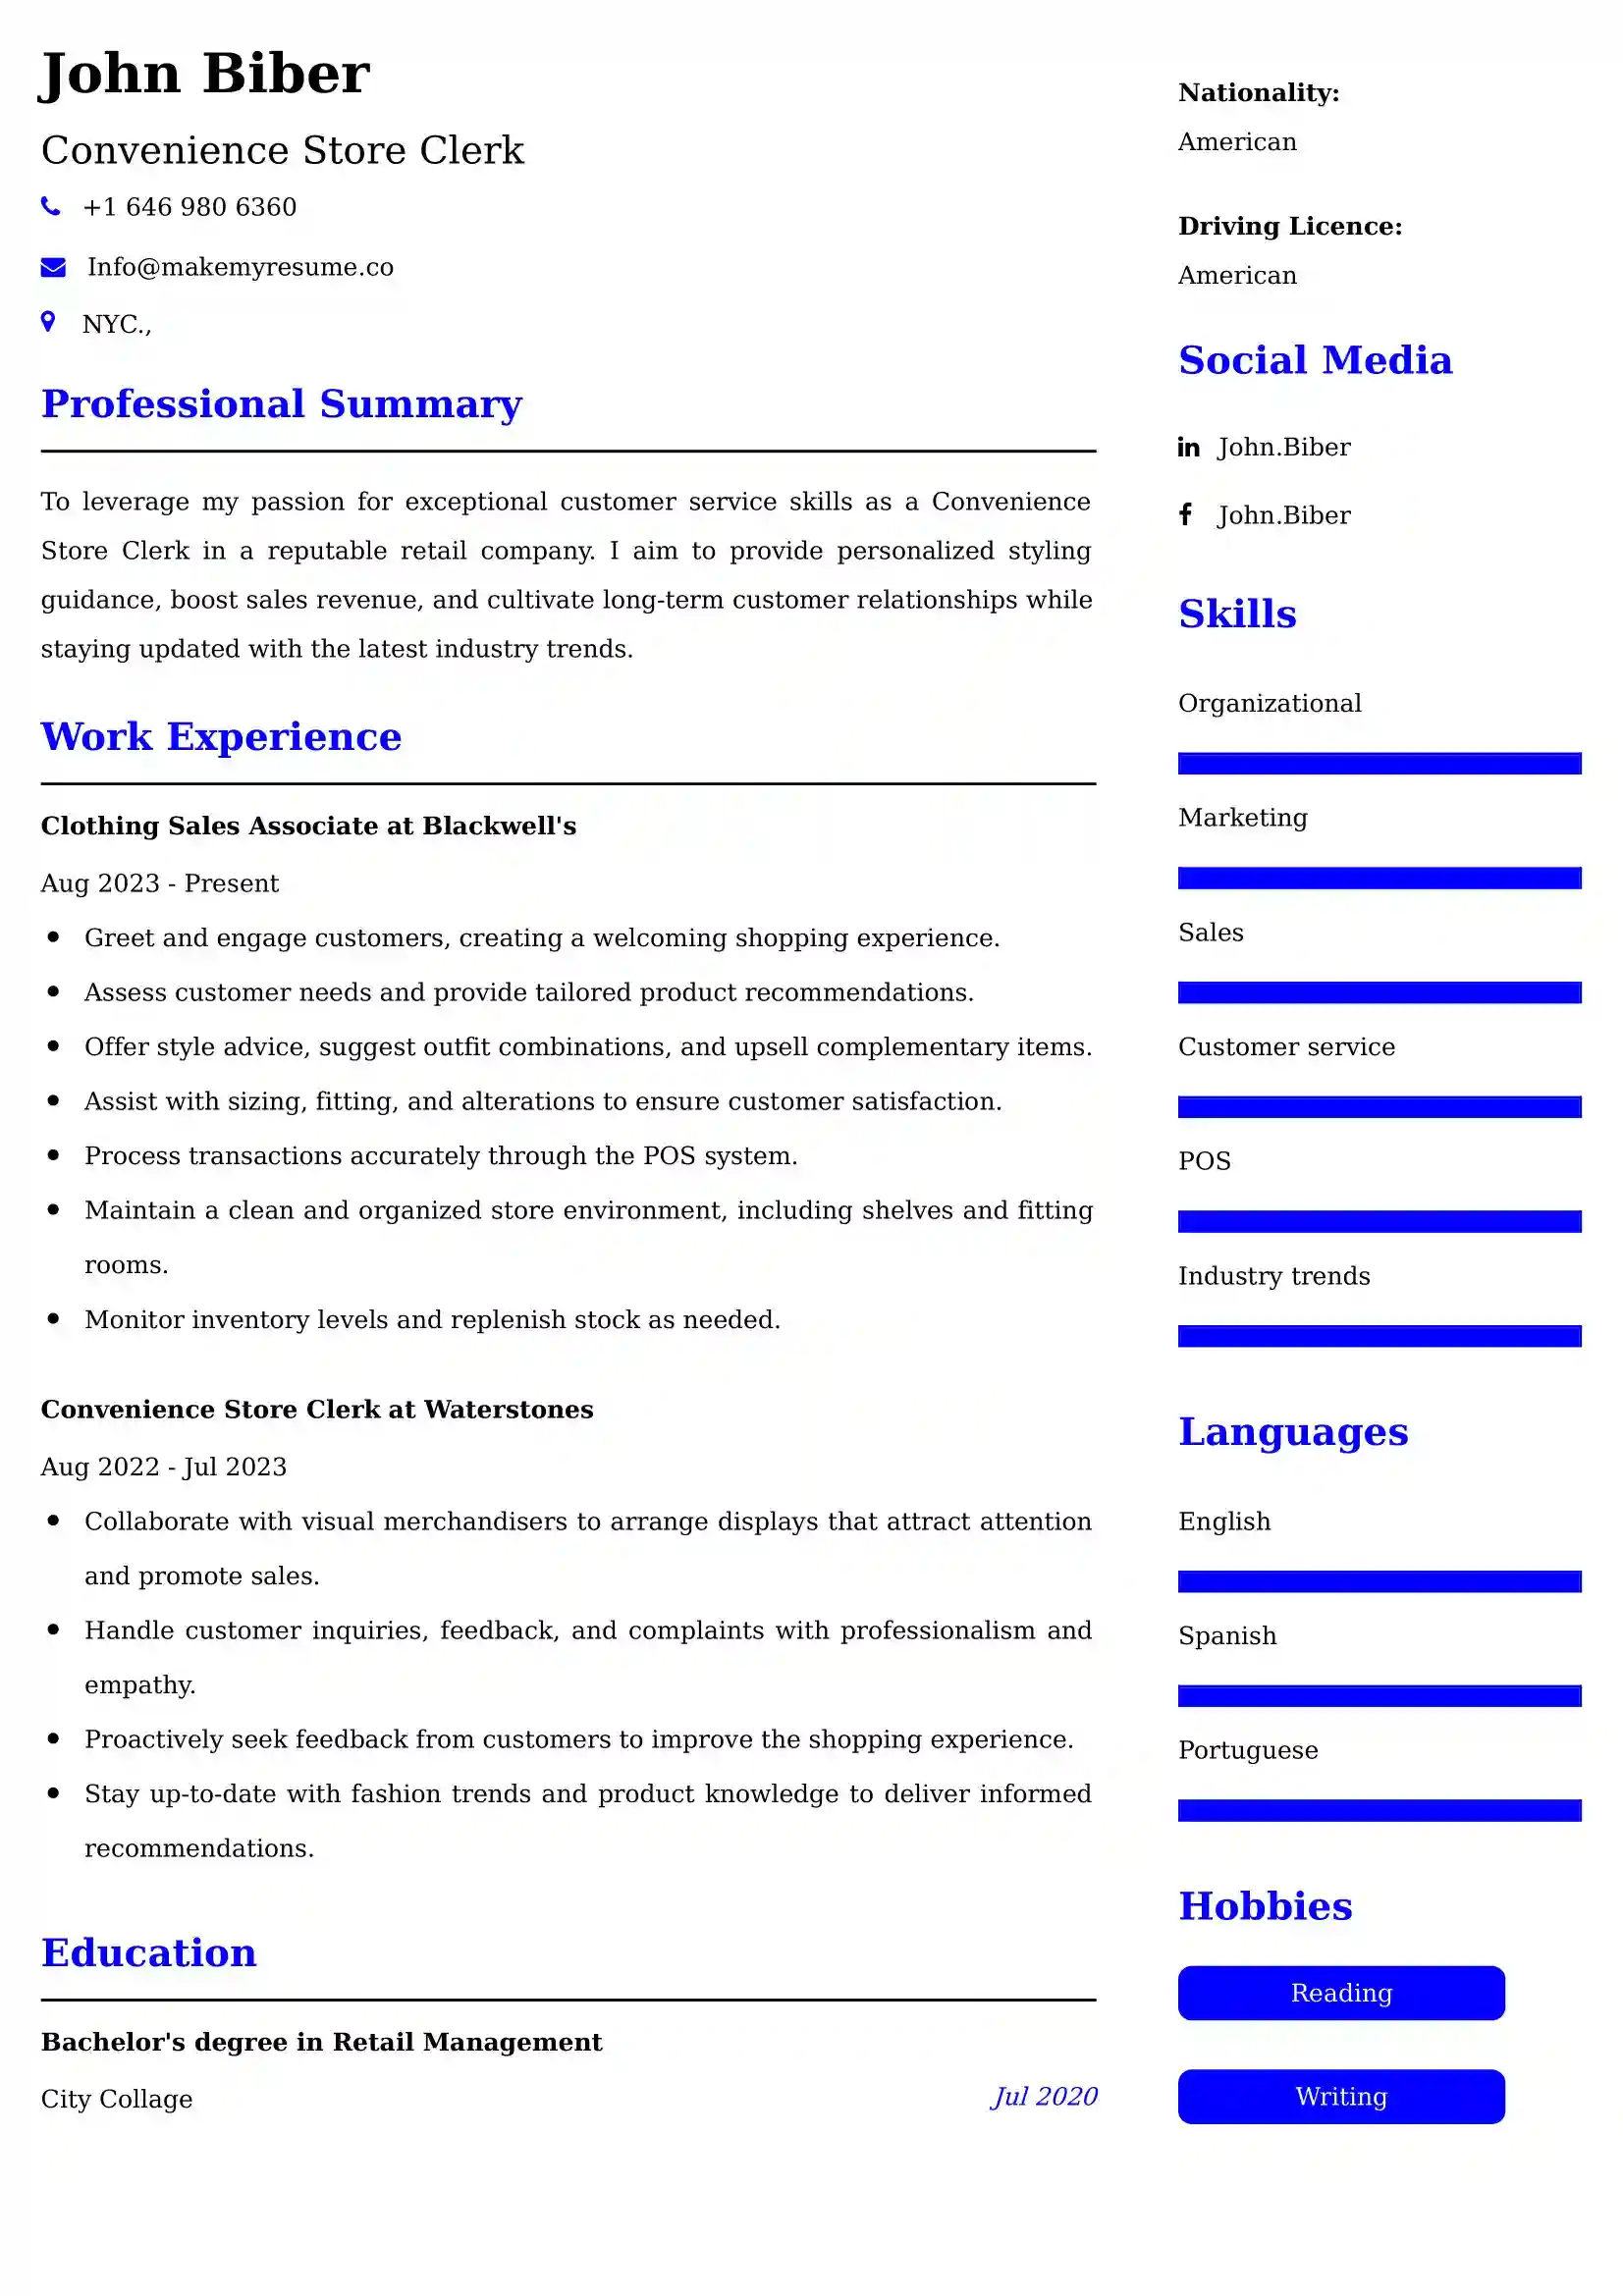 Best Convenience Store Clerk Resume Examples for UK